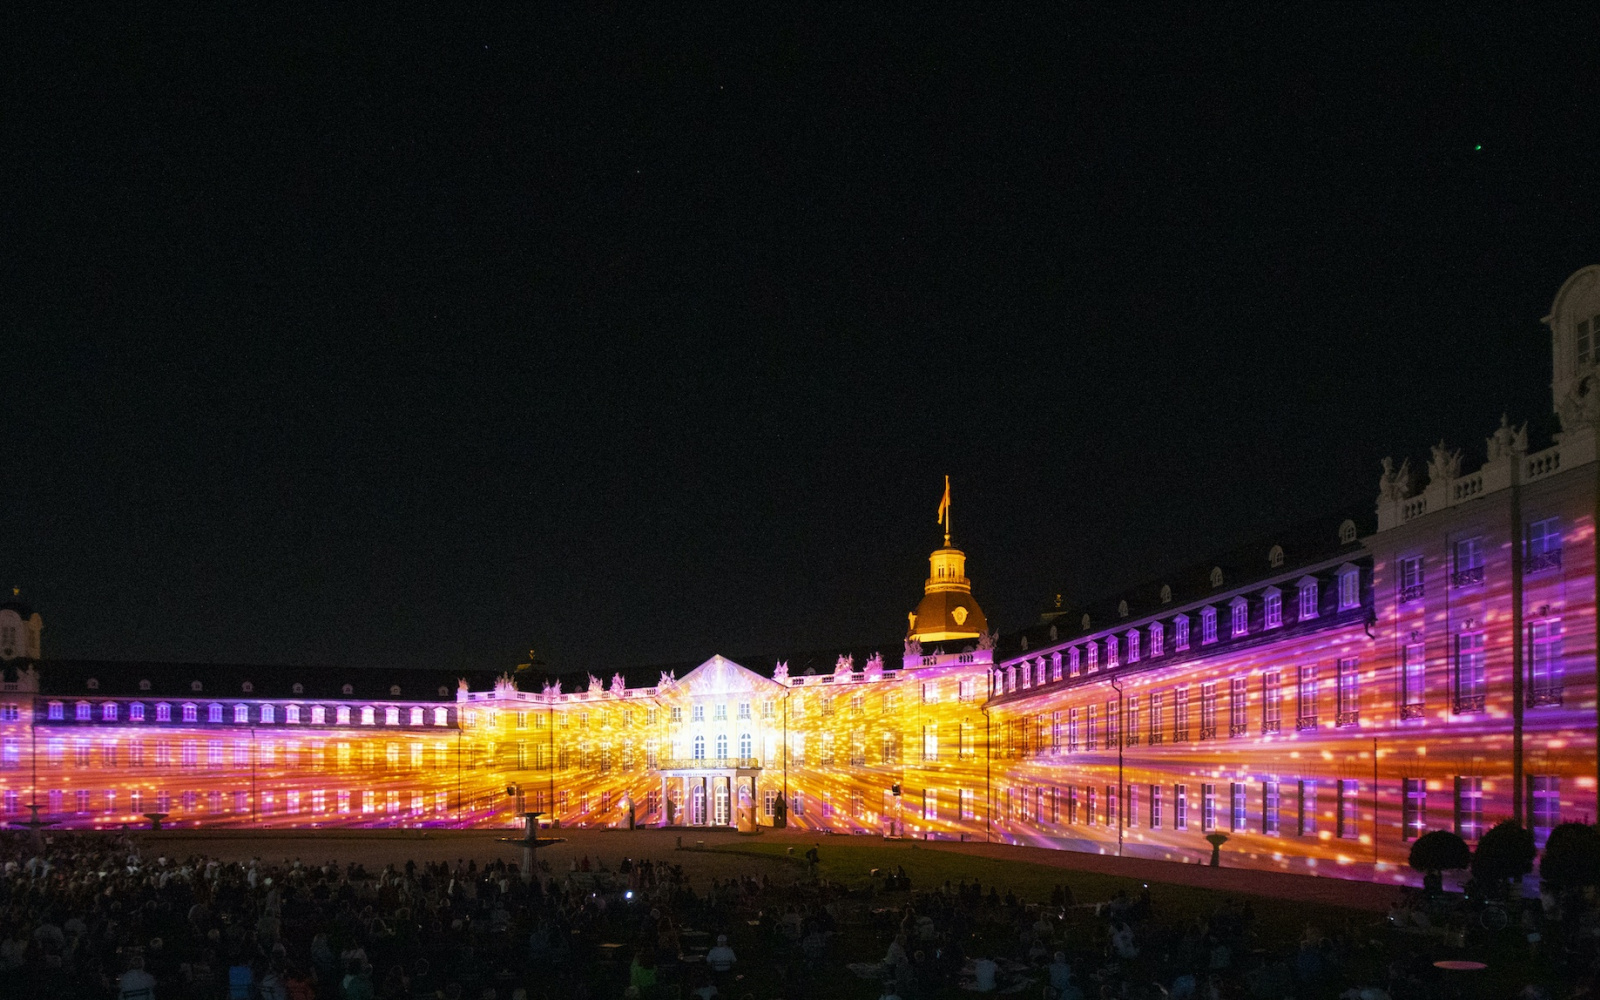 The facade of Karlsruhe Castle is illuminated in bright colors. It is night.